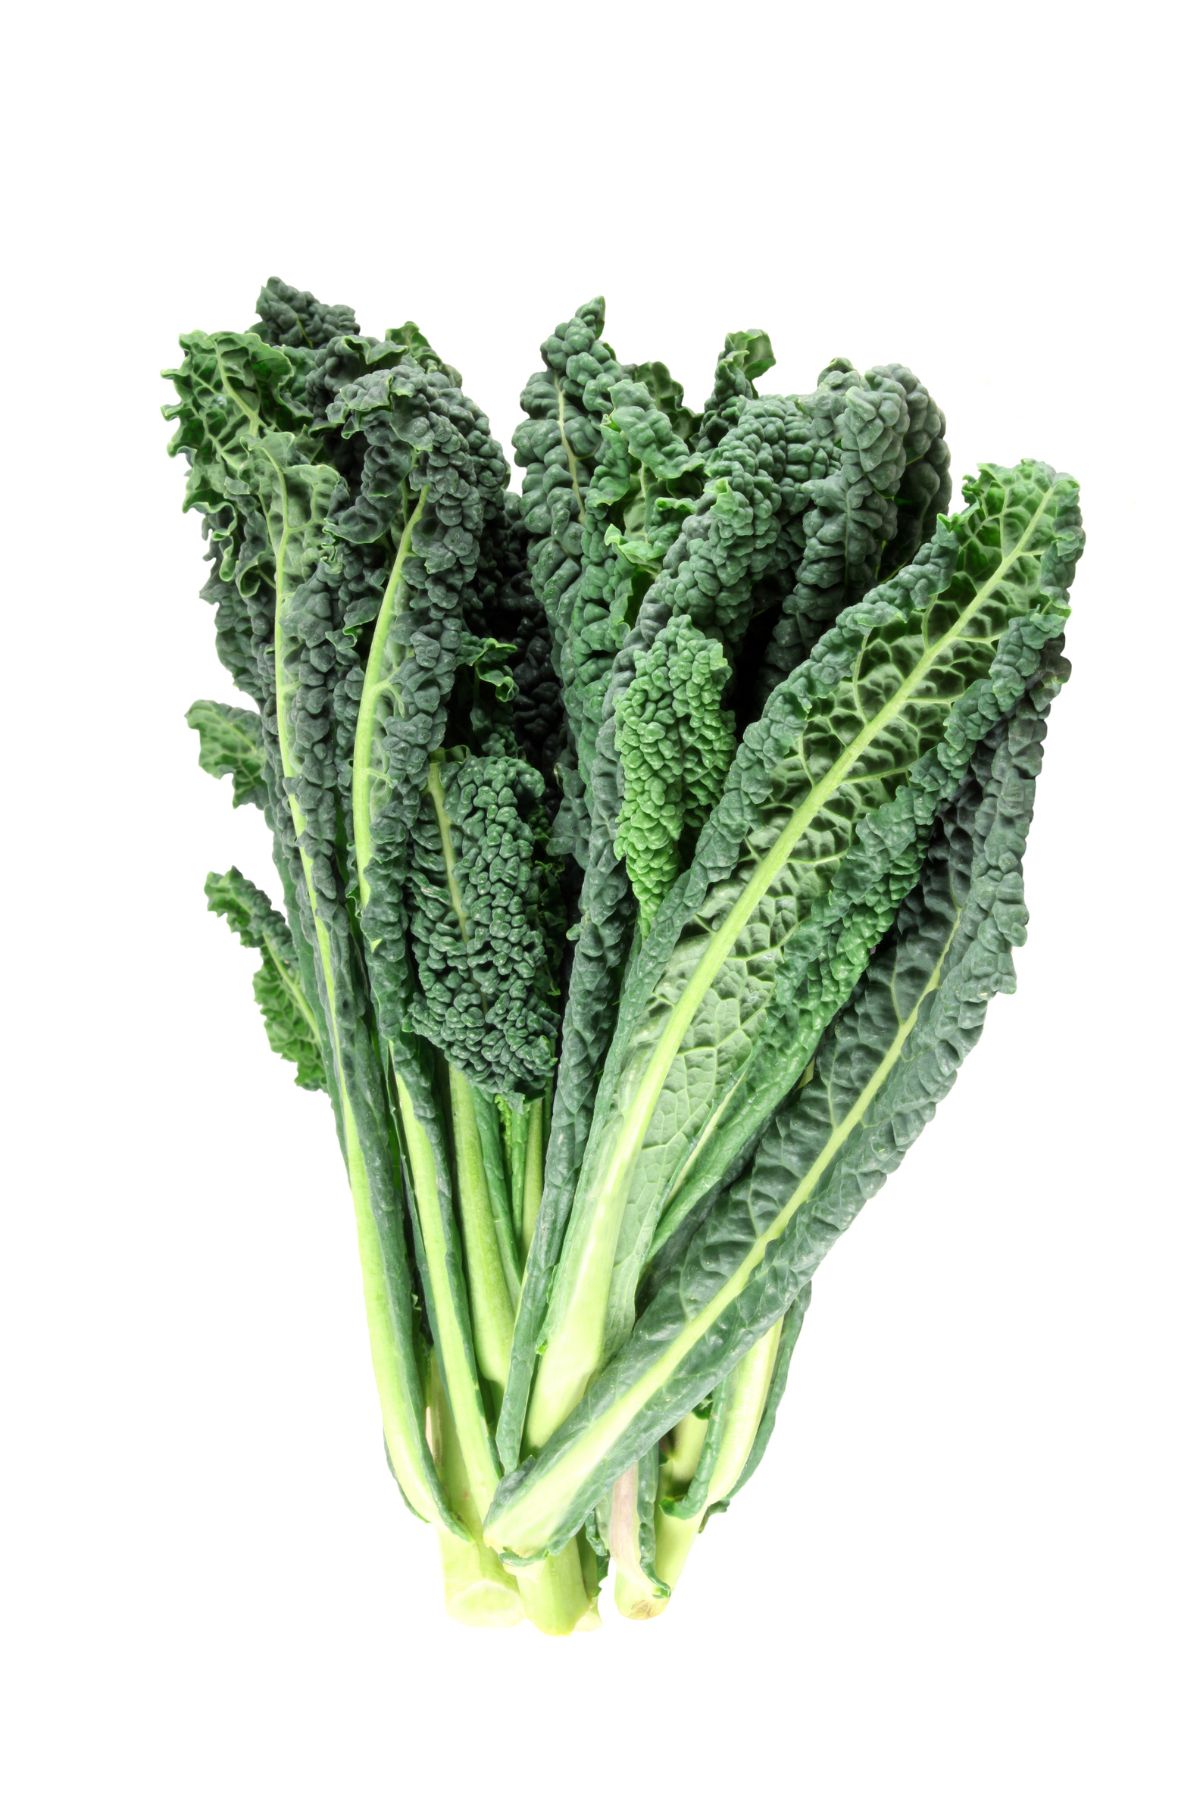 Bunch of Kale on white background.